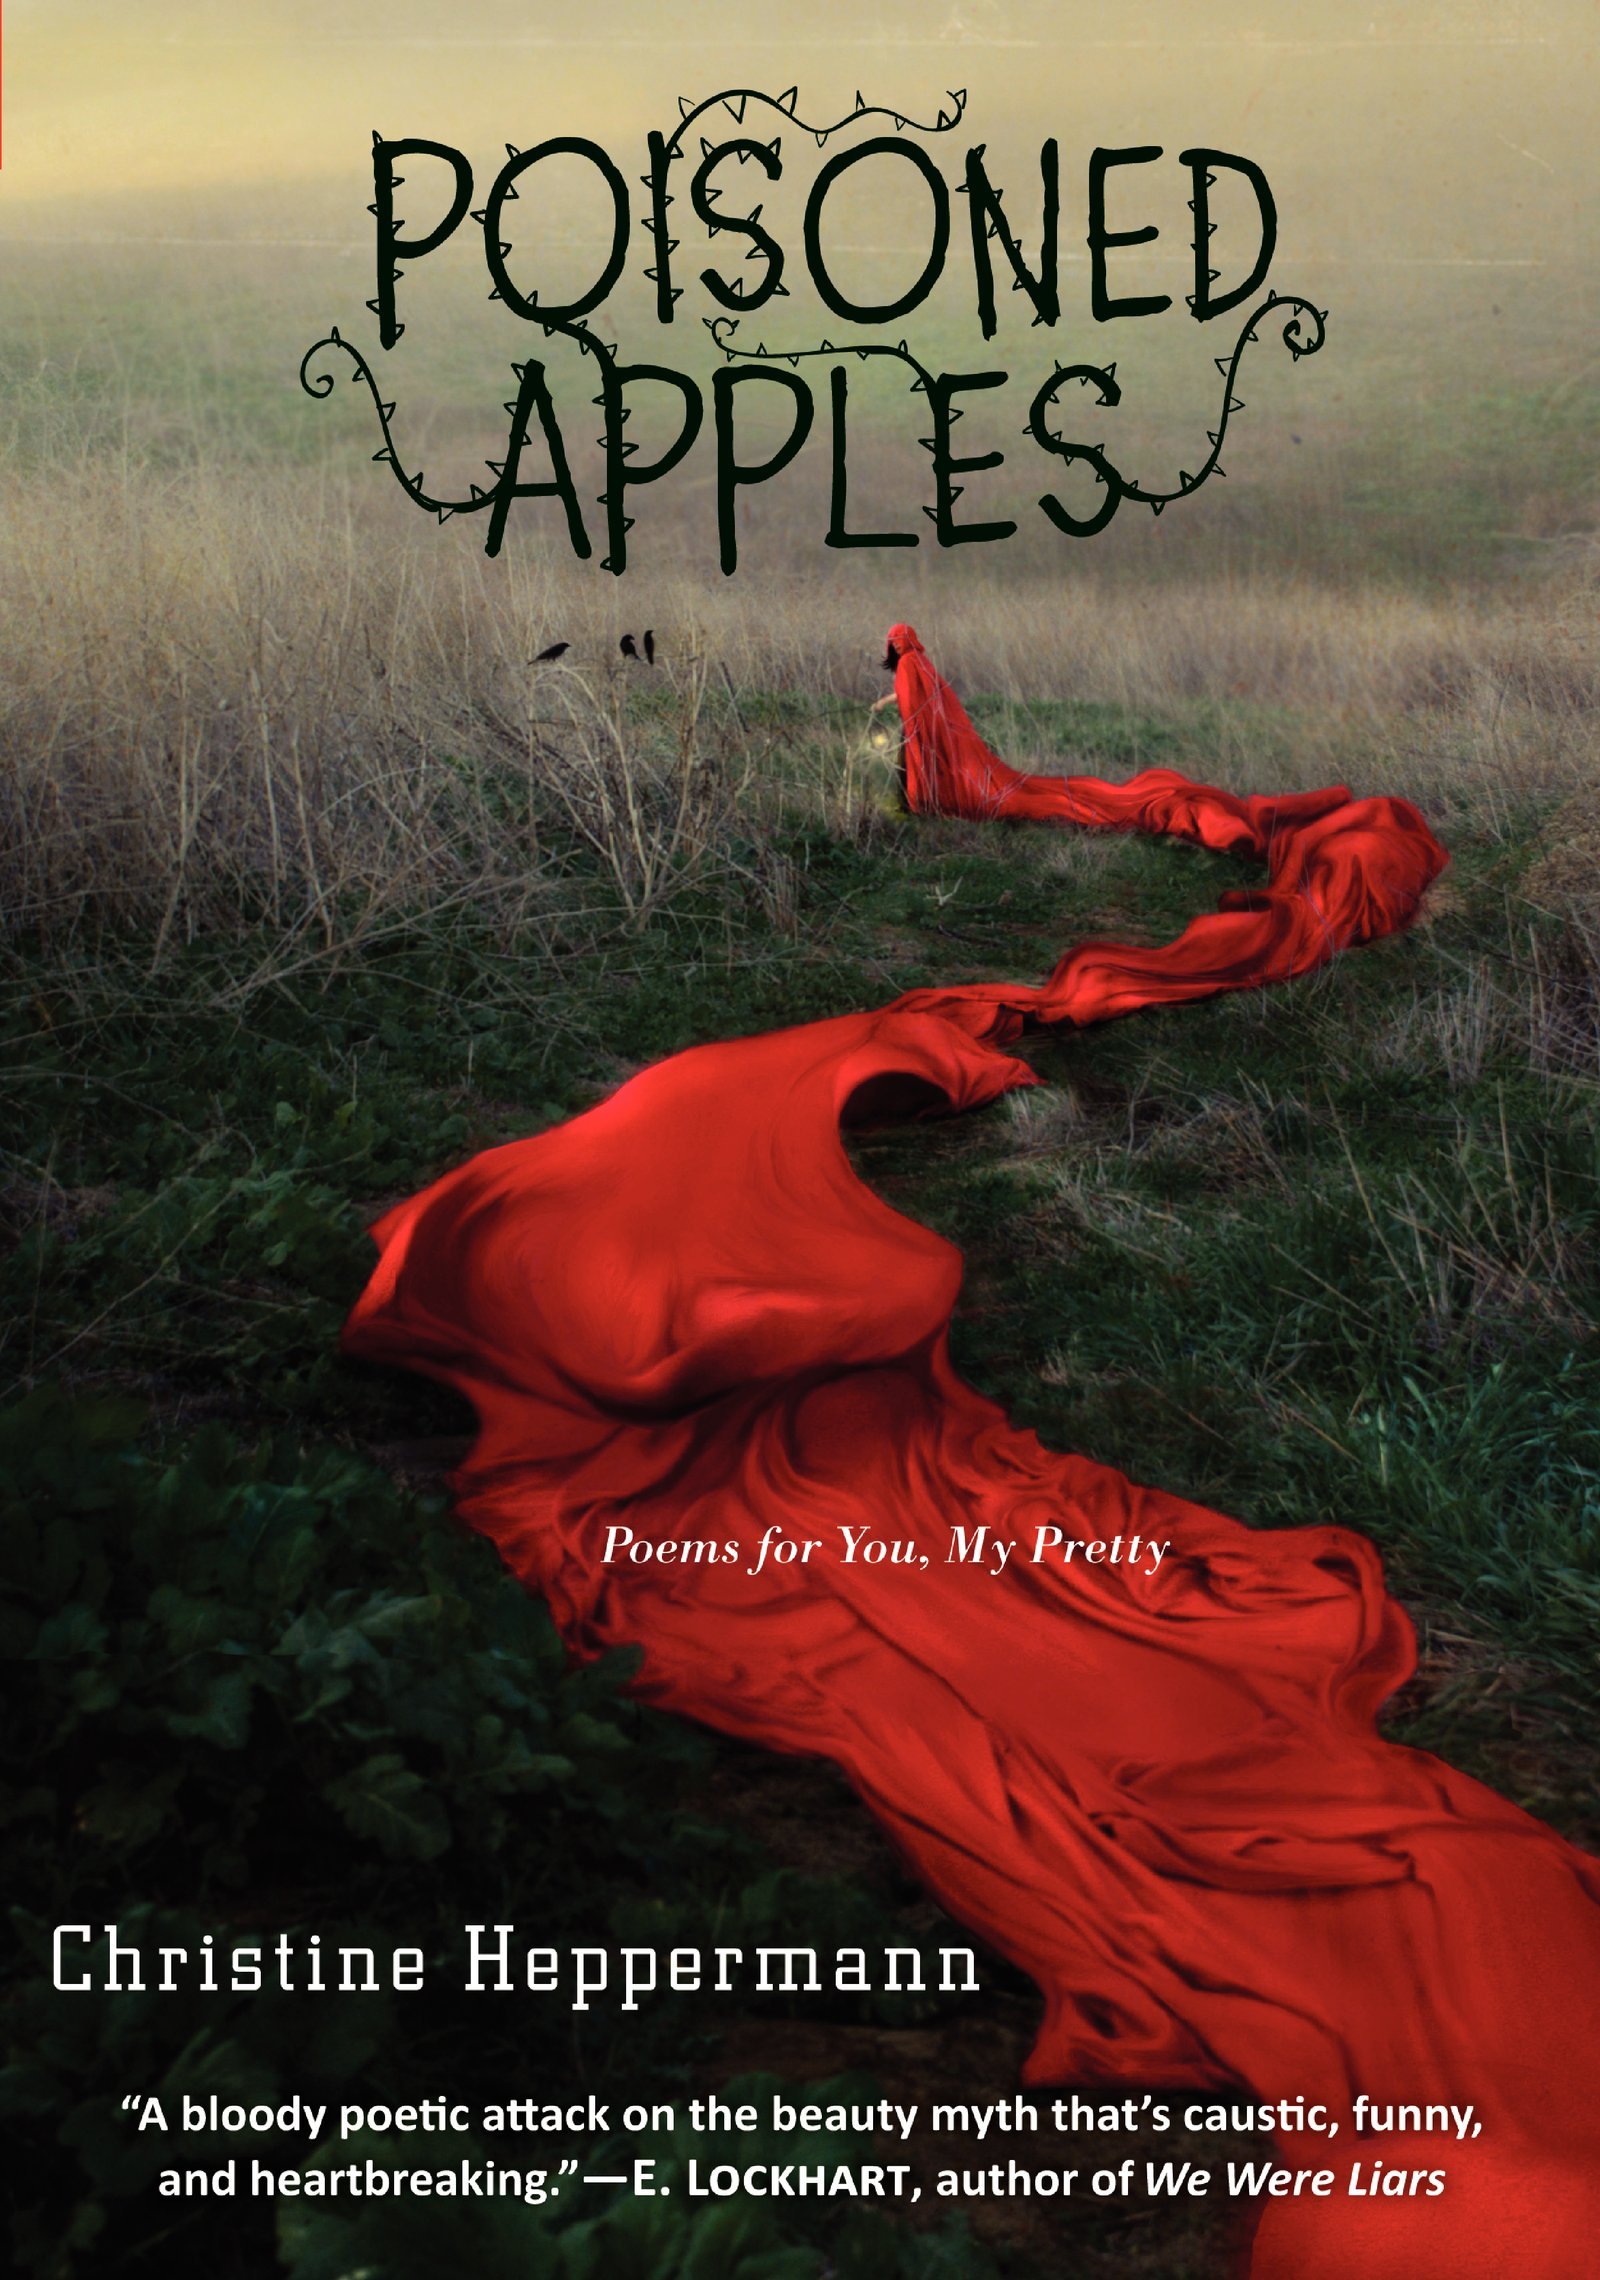 PoisonedApples Librarian Preview: Harper Collins (Fall 2014)